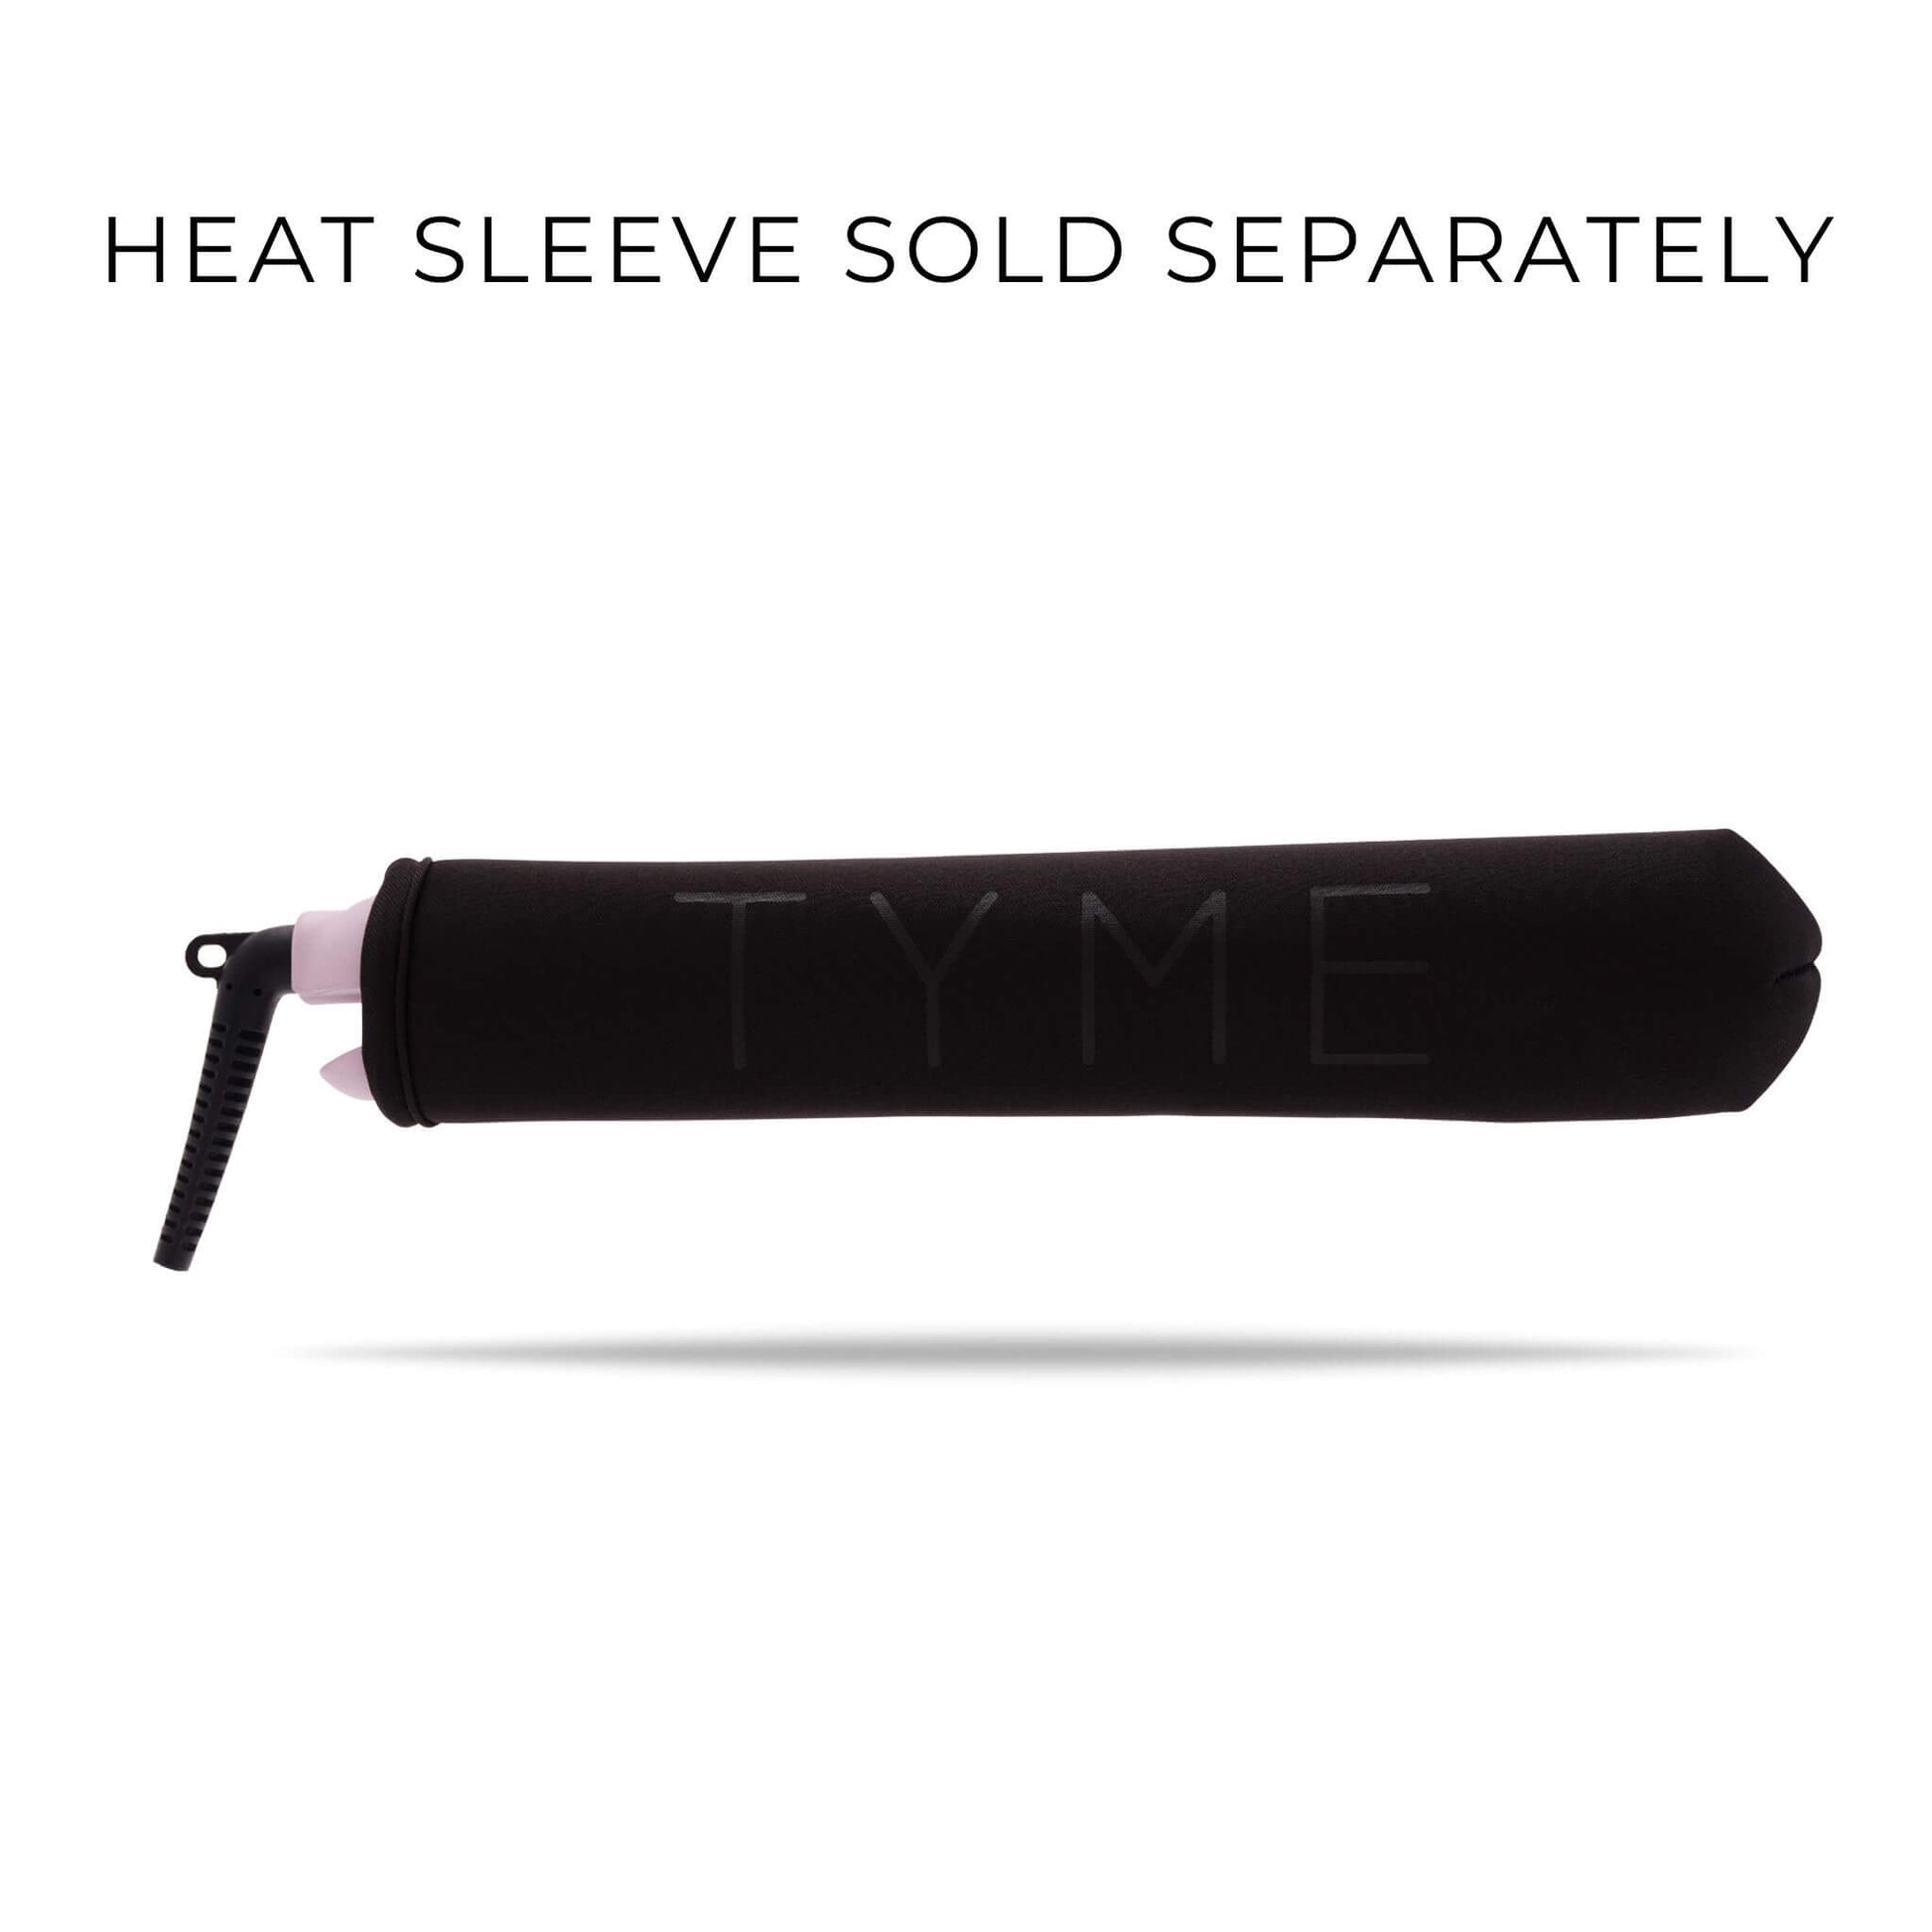 Purchase the heat sleeve separately for your TYME Iron Pro: Aura.